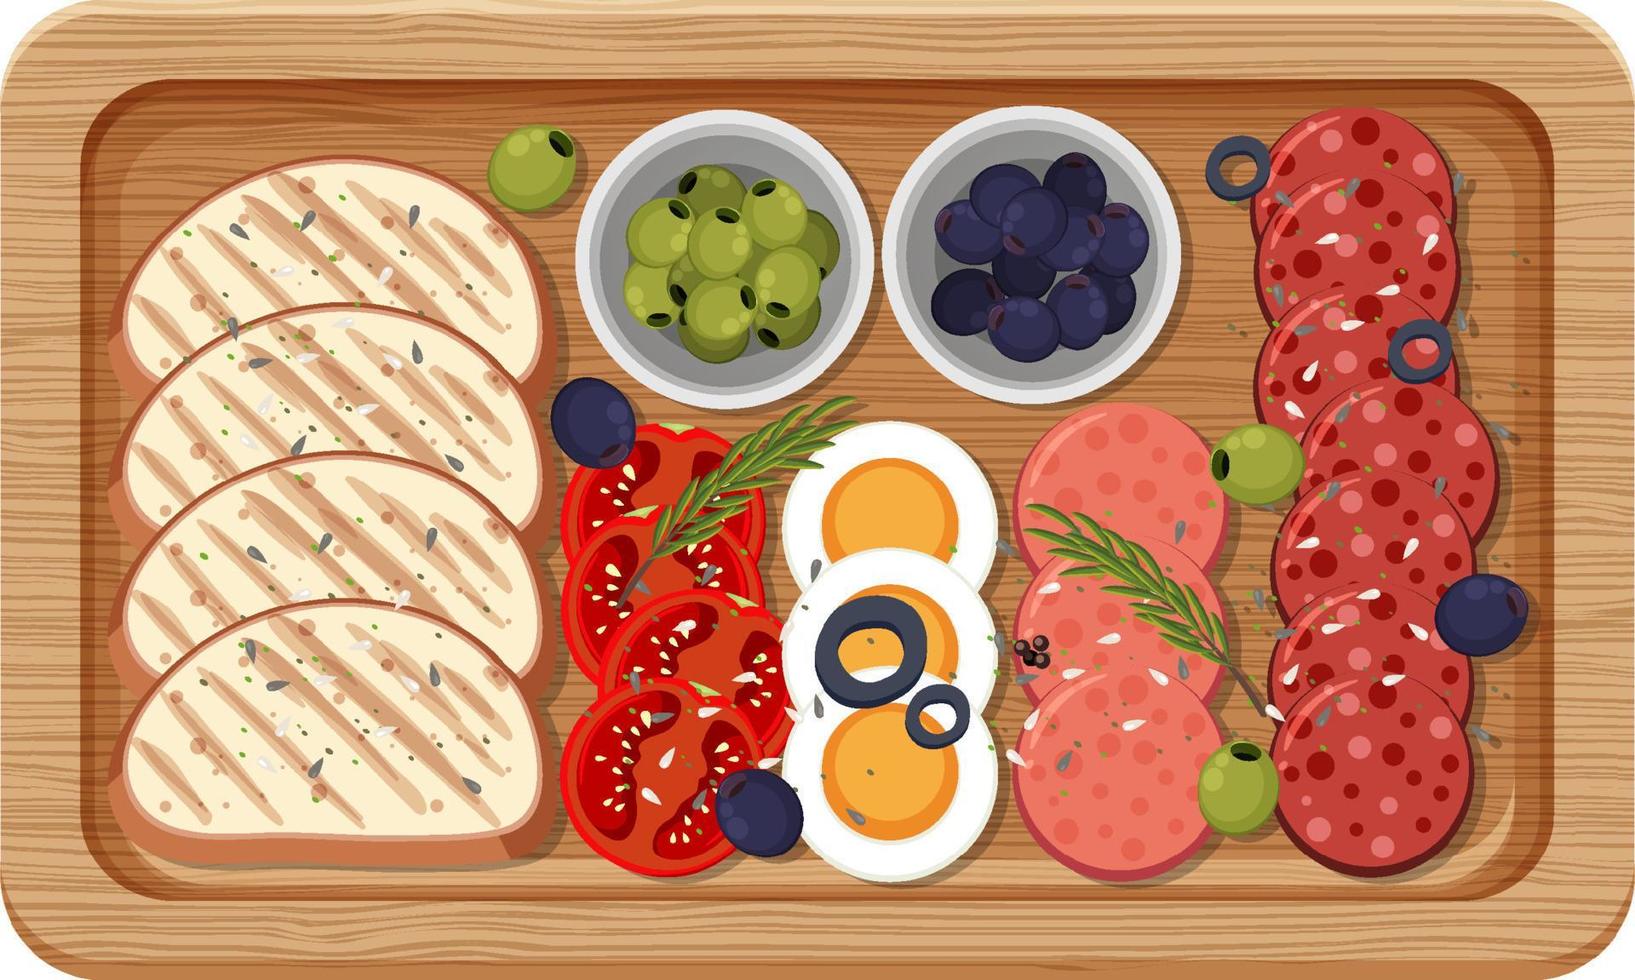 Top view of lunch meat on a wooden tray vector